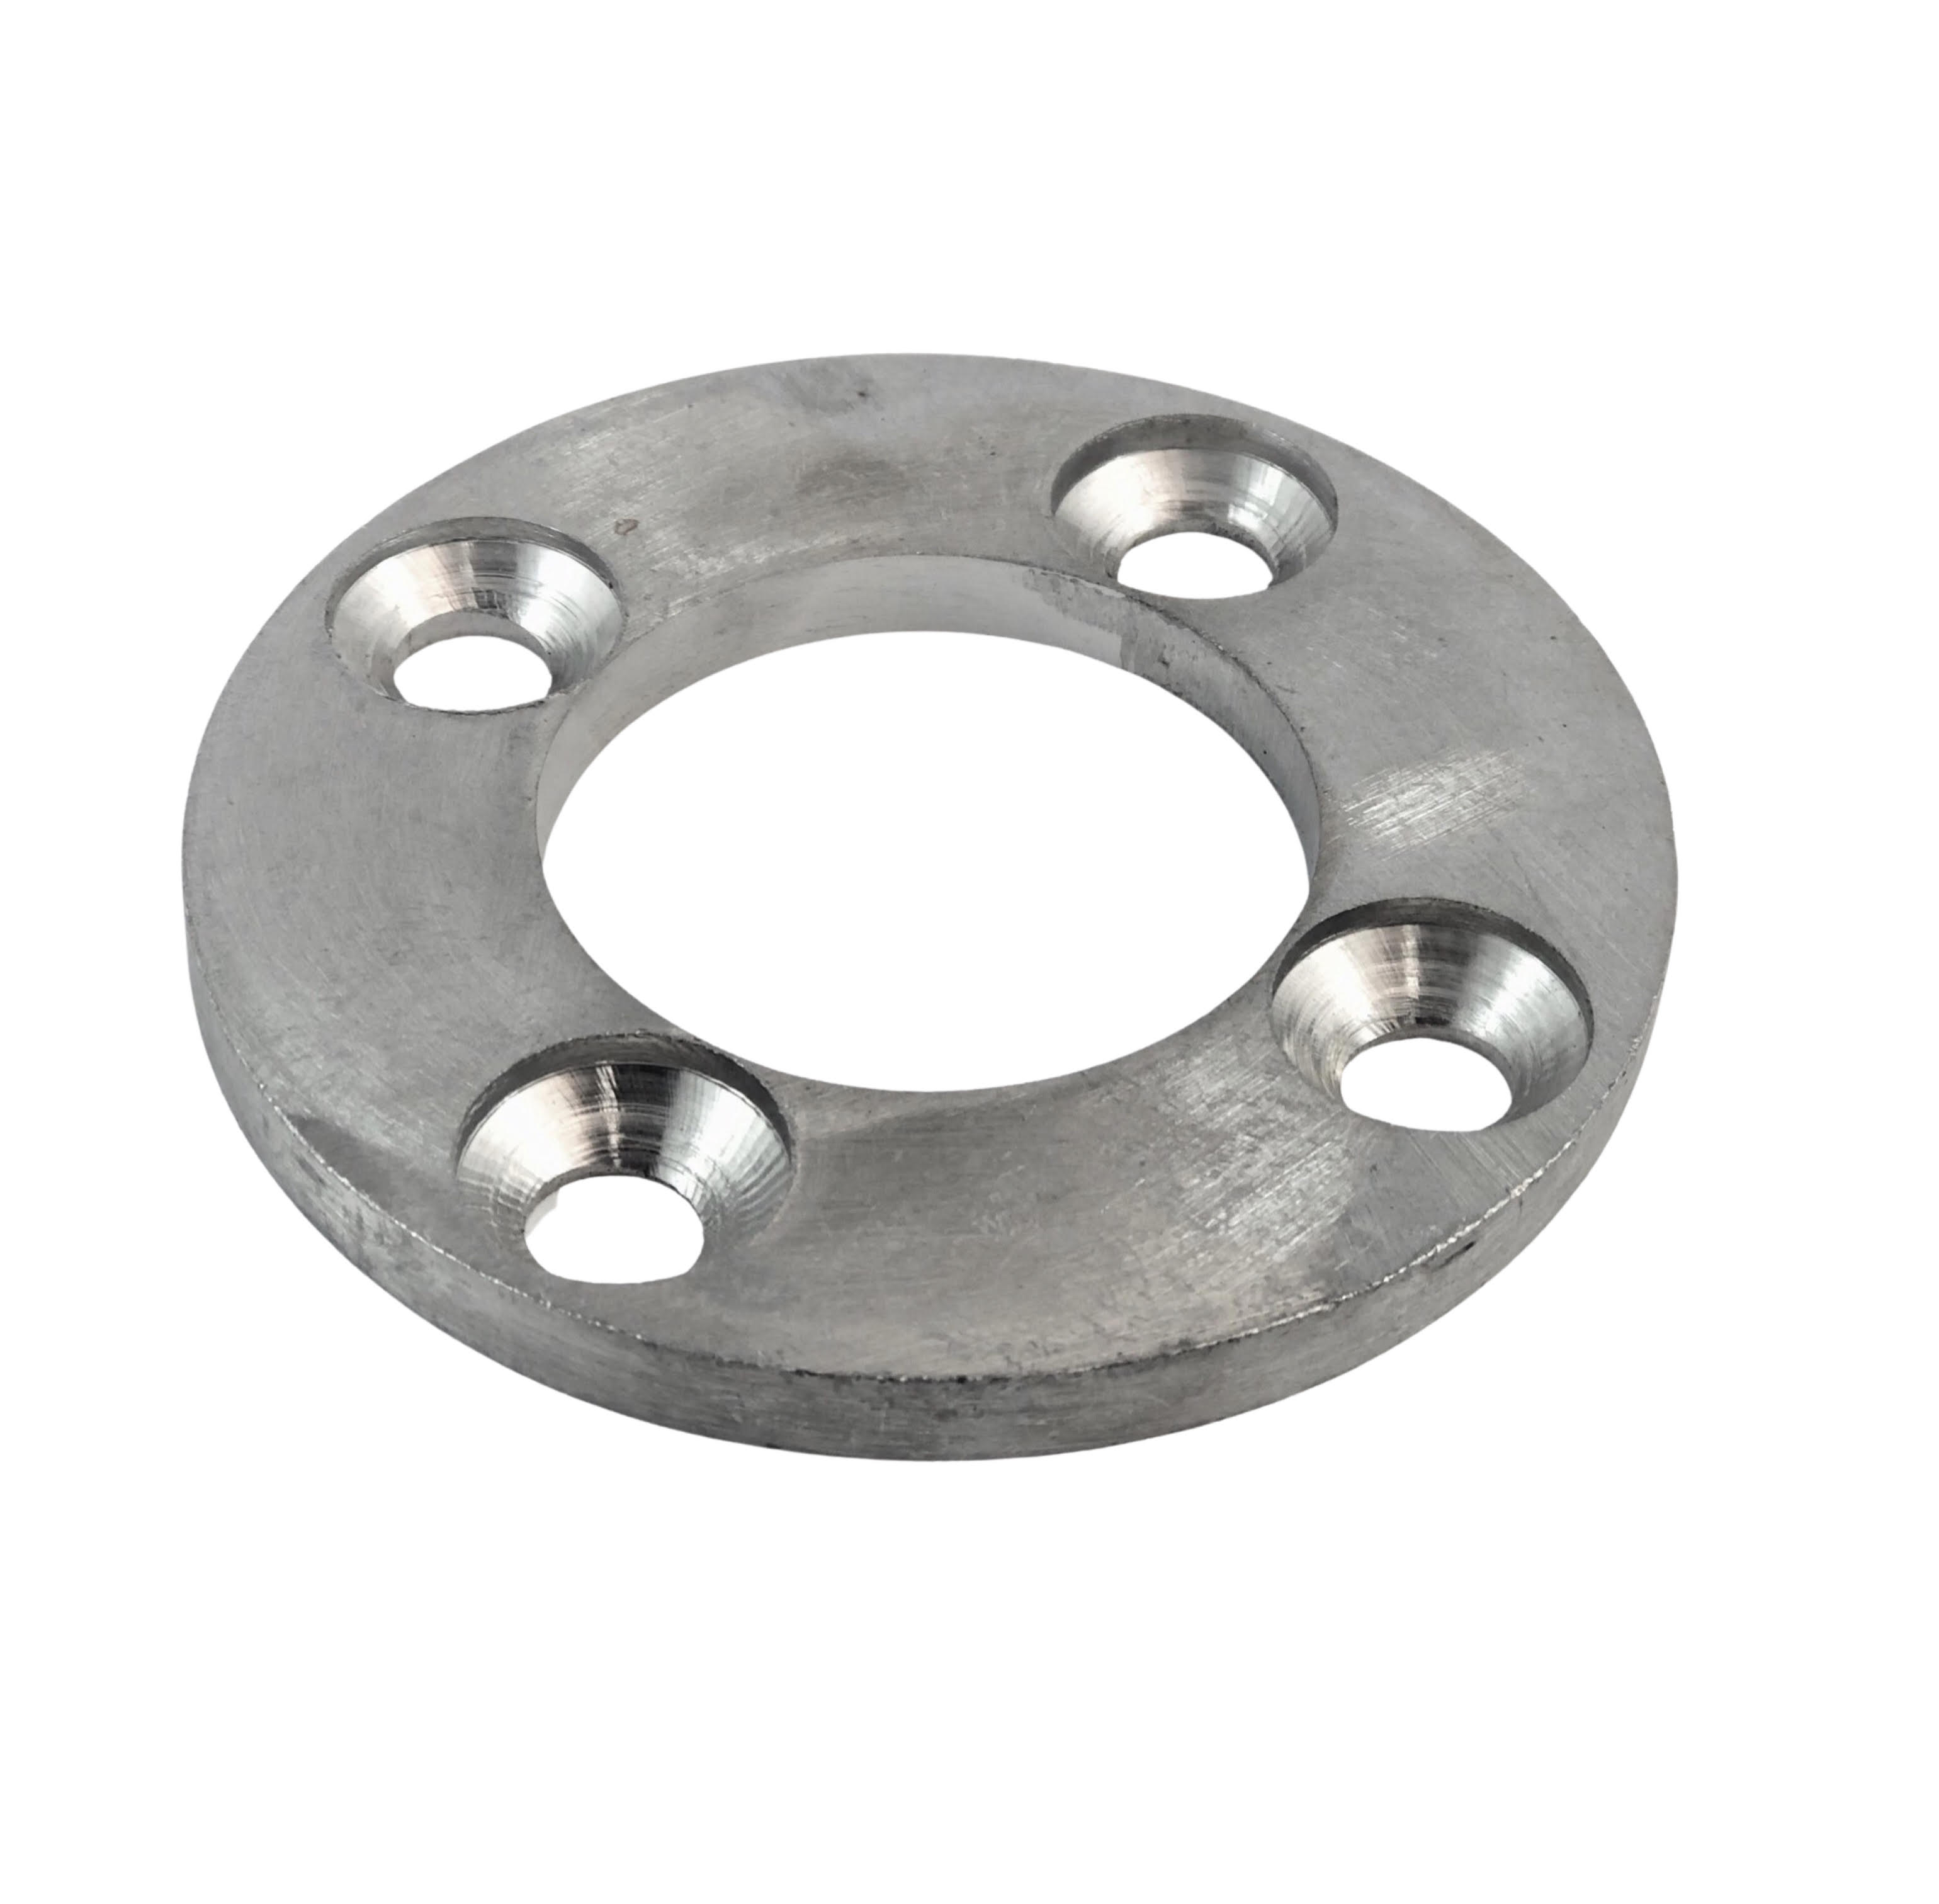 Base Plate 316L Stainless Steel 4 x Counter Sunk Holes